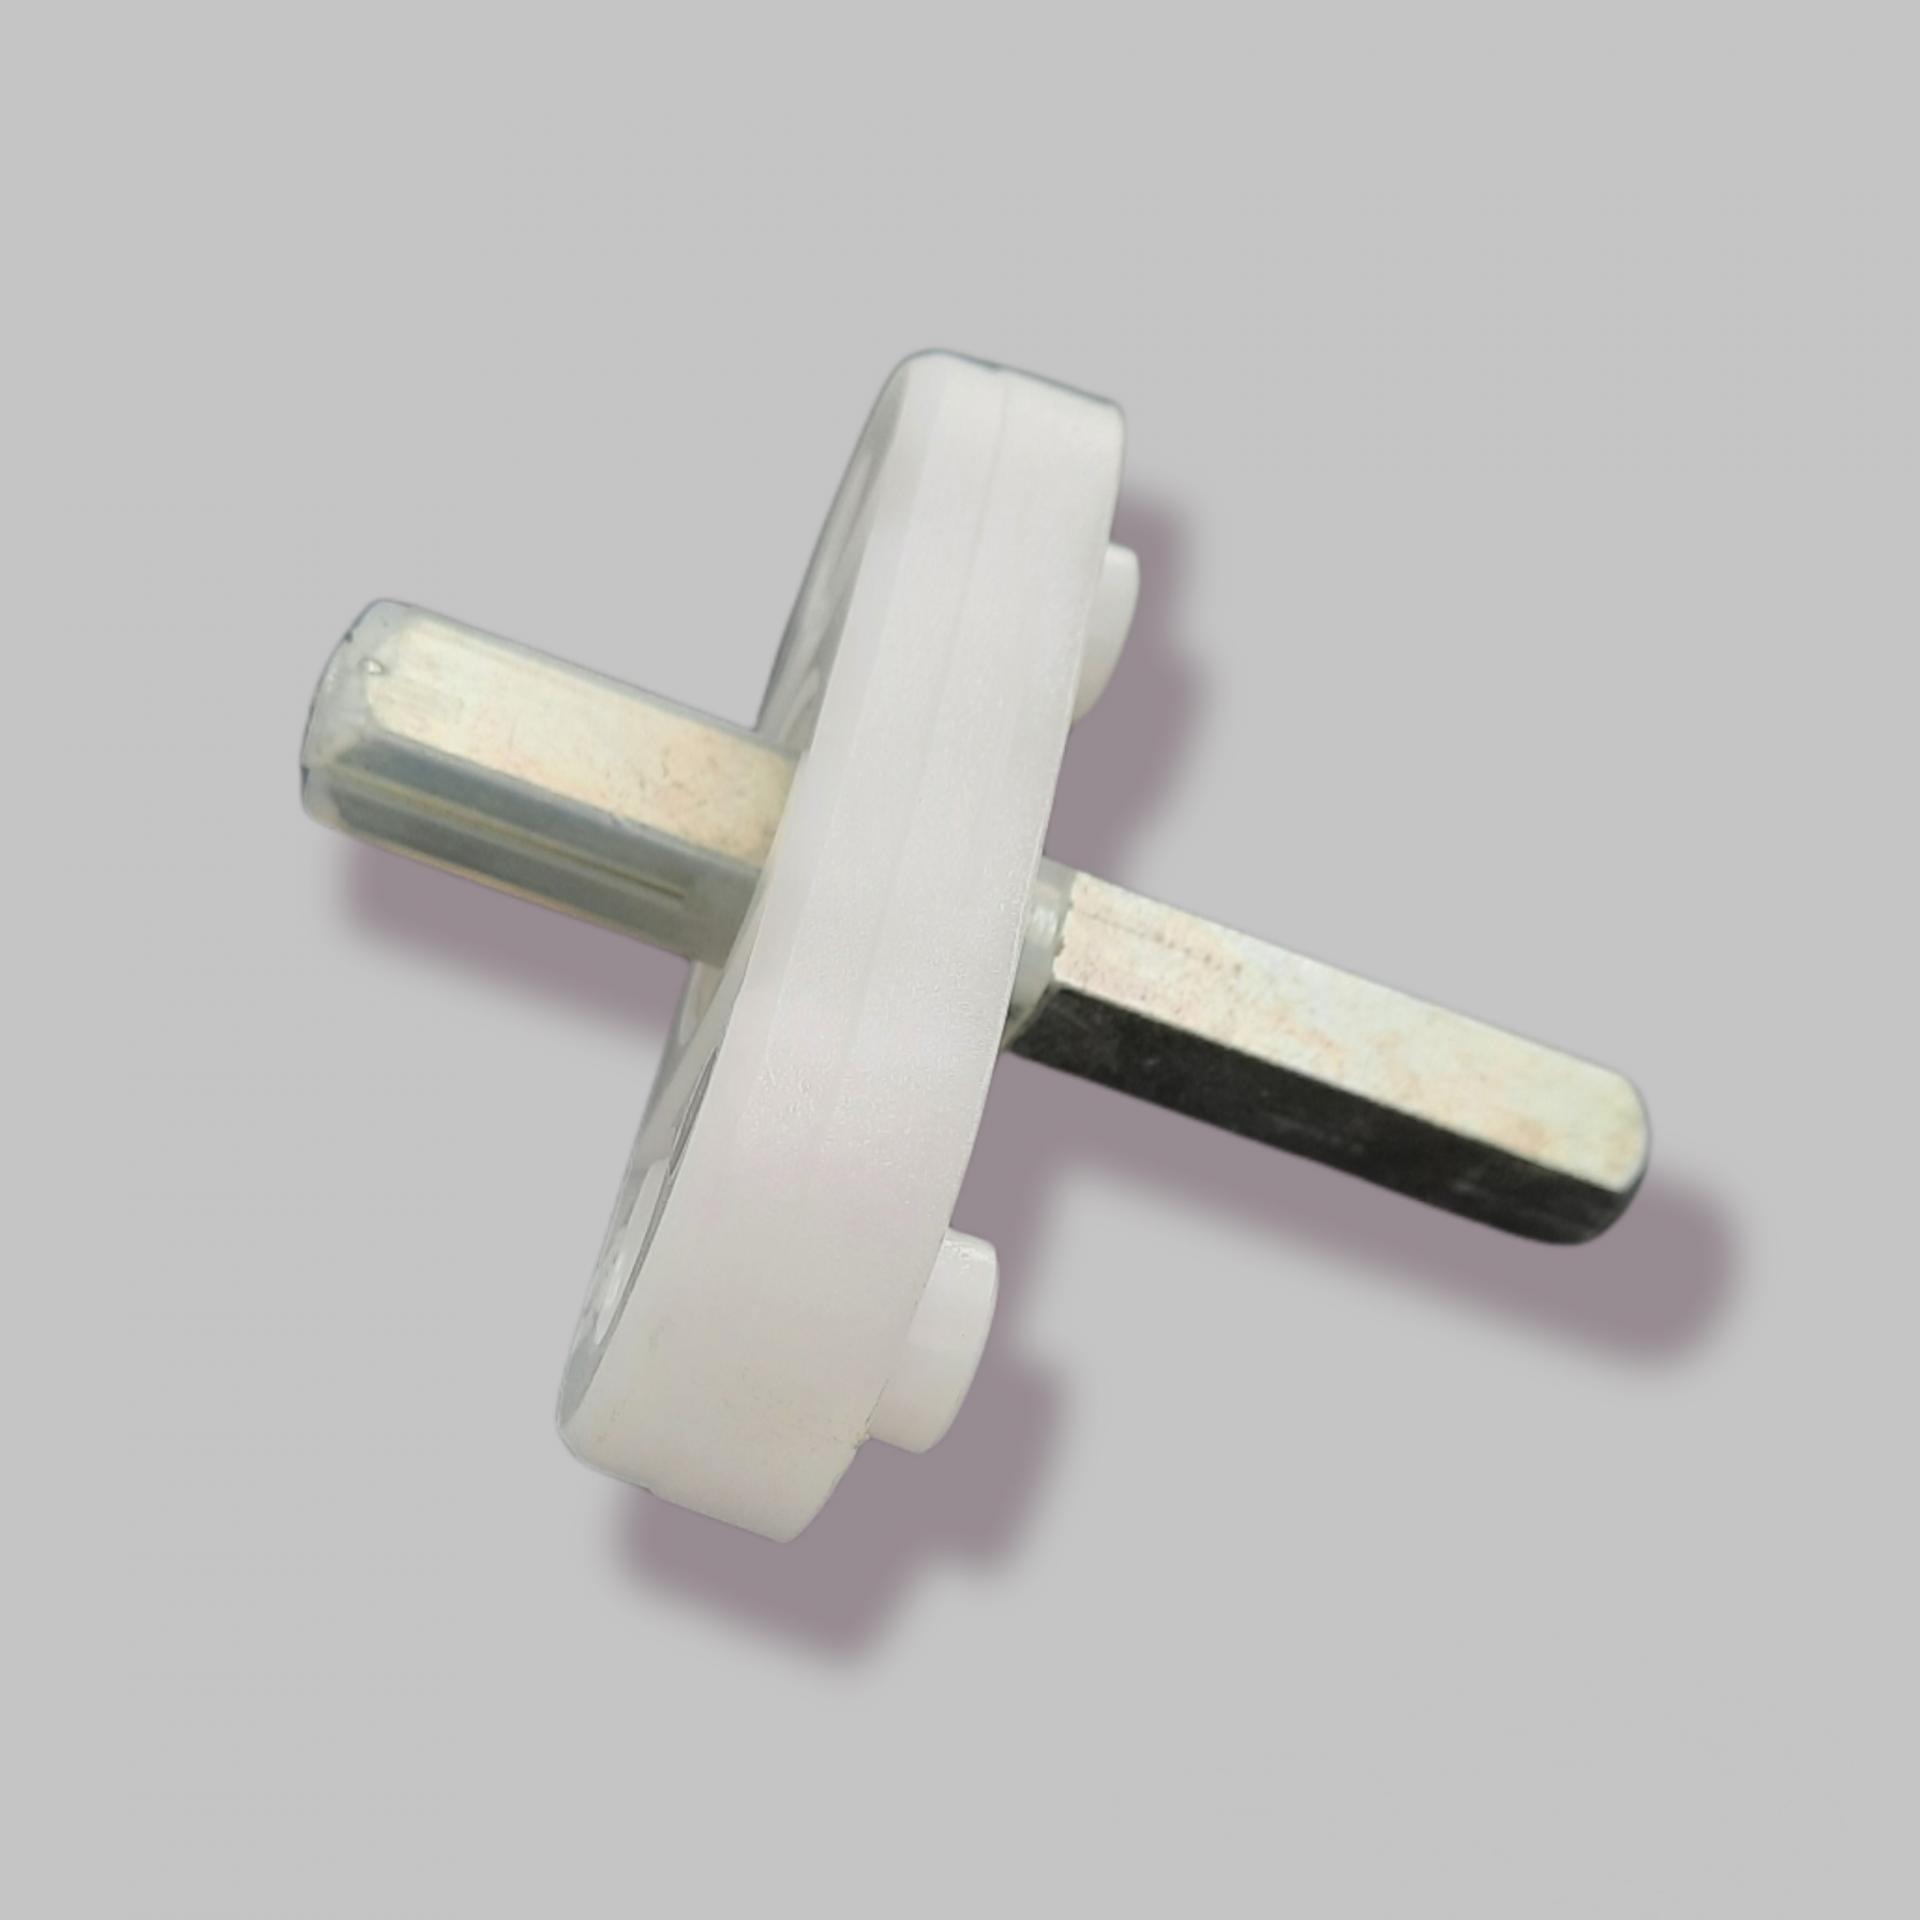 Tilt and turn rose with square spindle for window handles